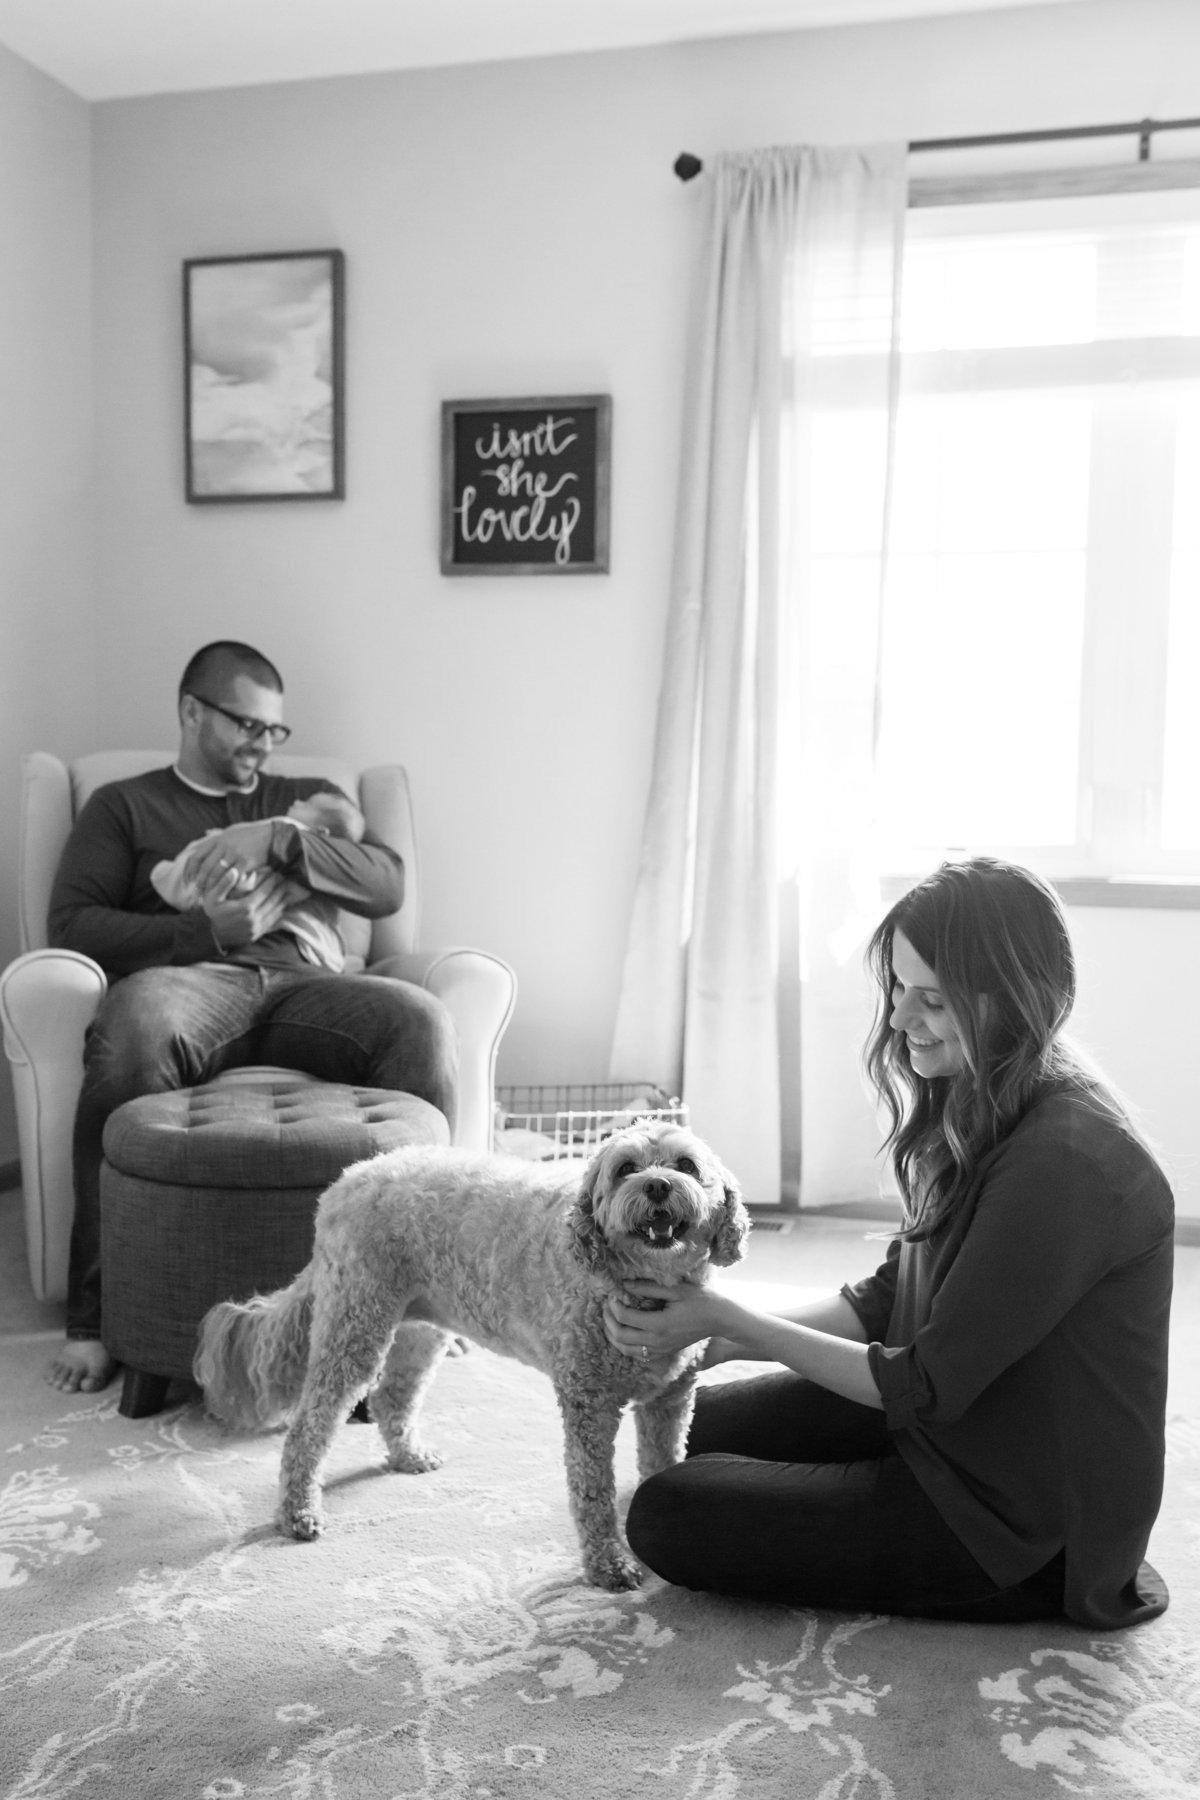 Parents in nursery with dog and baby - Naperville Lifestyle Newborn Photographer - Jen Madigan